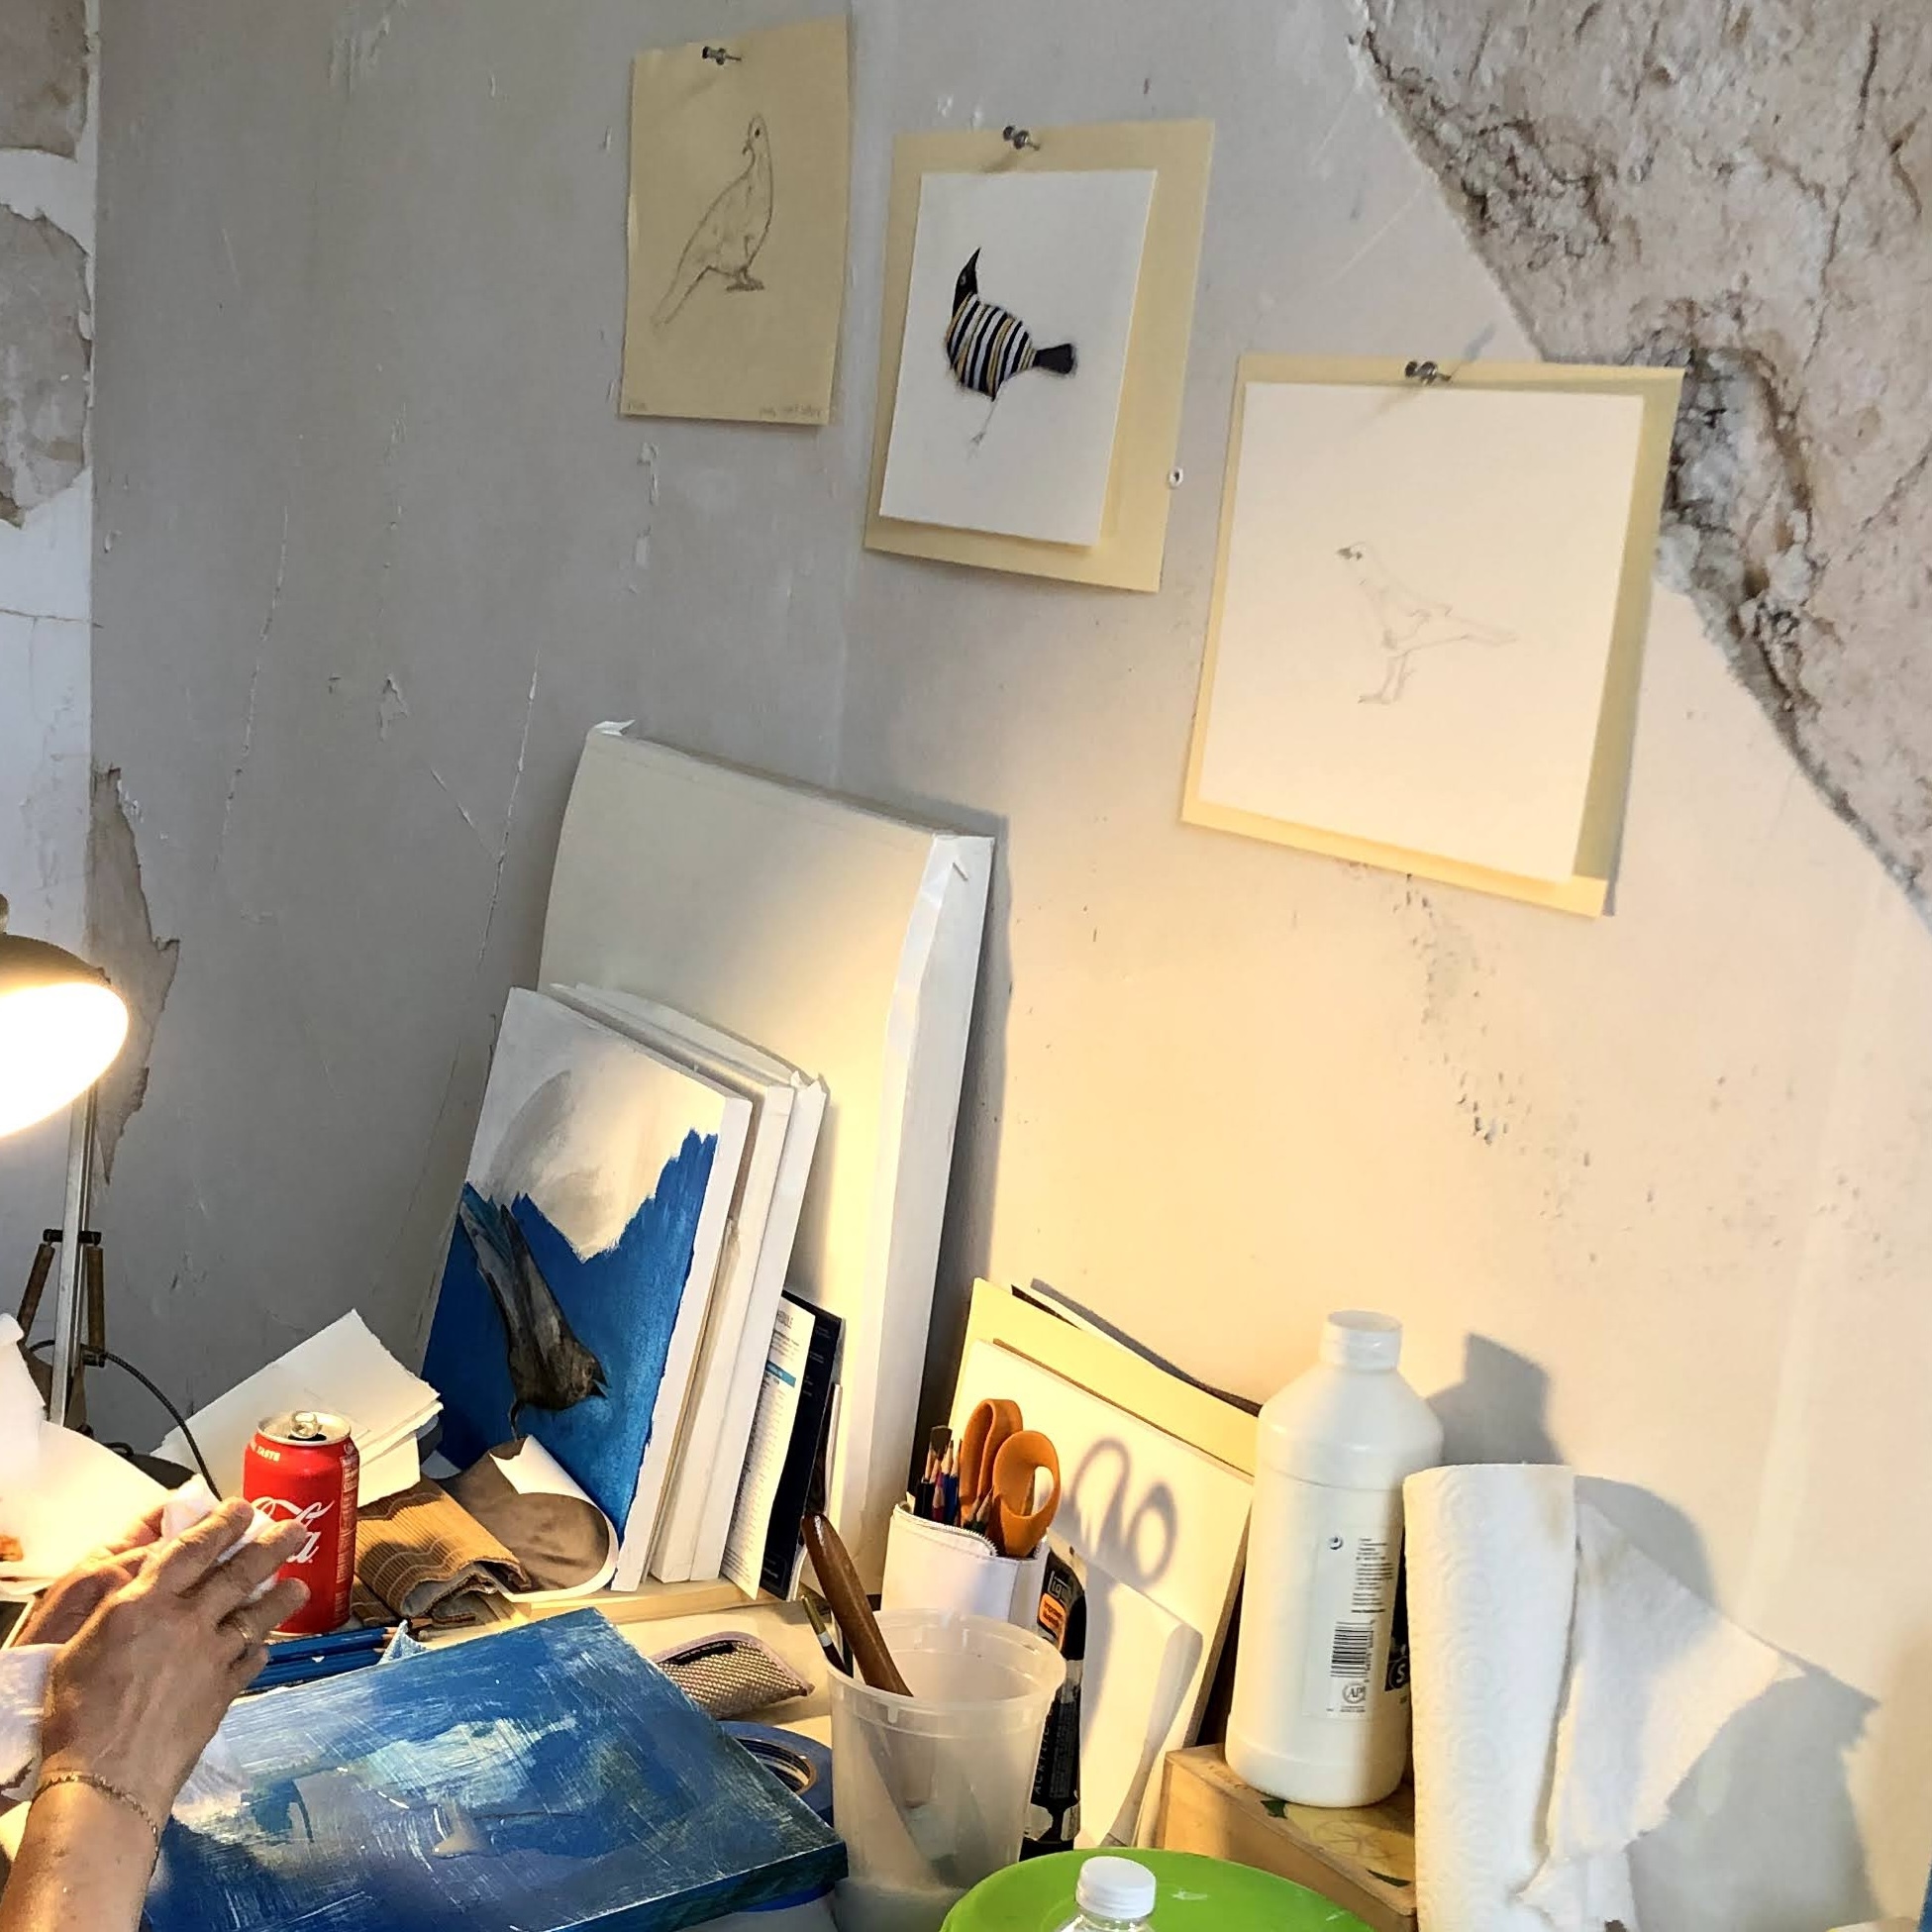 A NYC Audubon Artist in Residence works in their studio on Governors Island. Photo credit: NYC Audubon